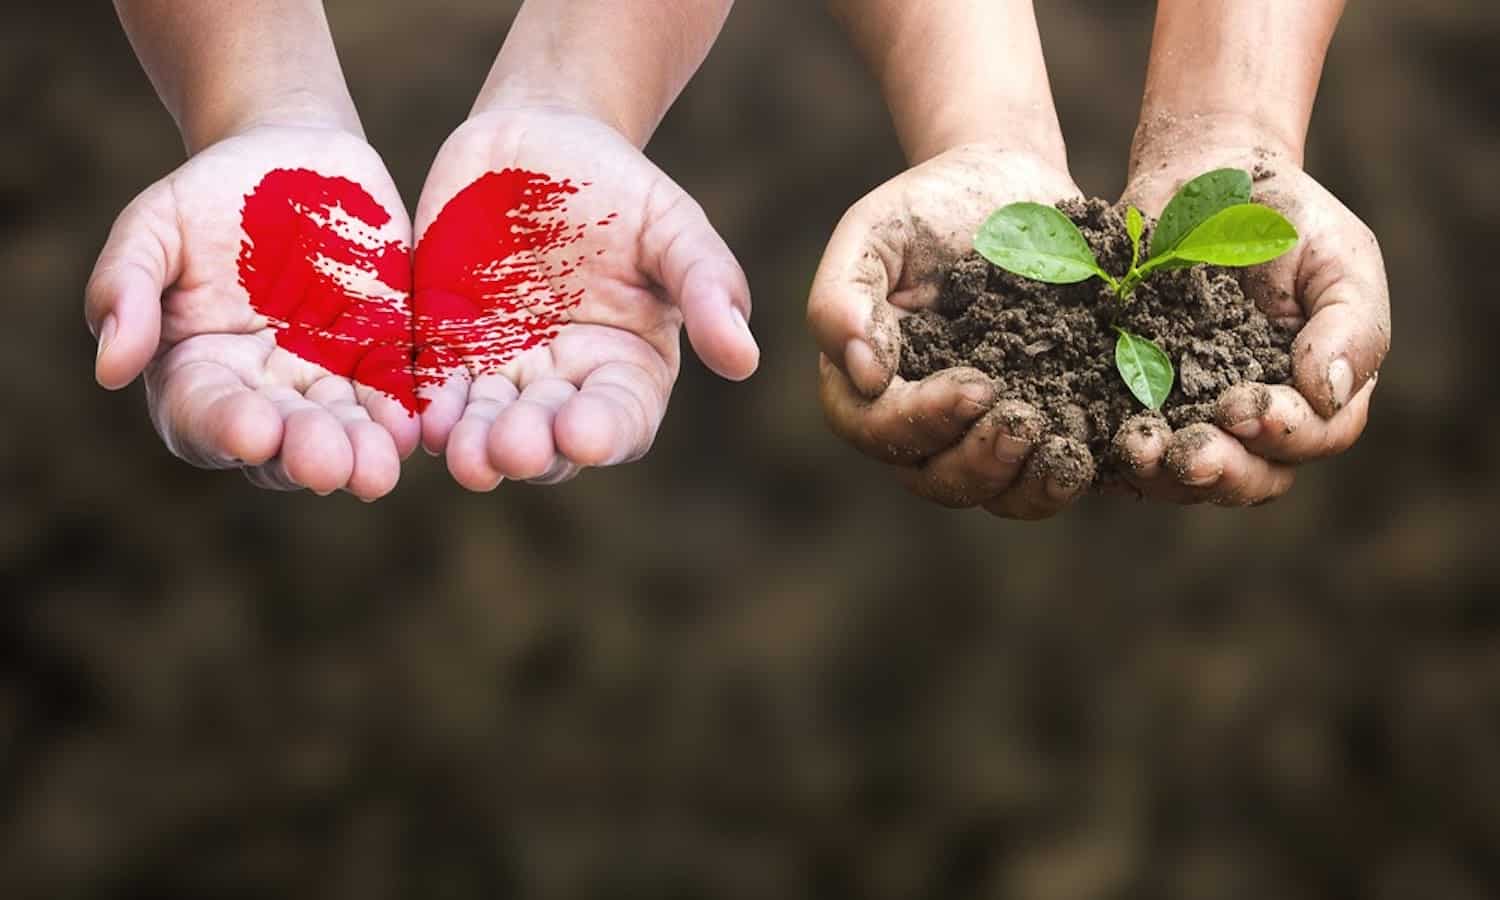 To celebrate World Soil Day, Food Tank is highlighting the work of 10 soil scientists from around the globe driving sustainable soil management.